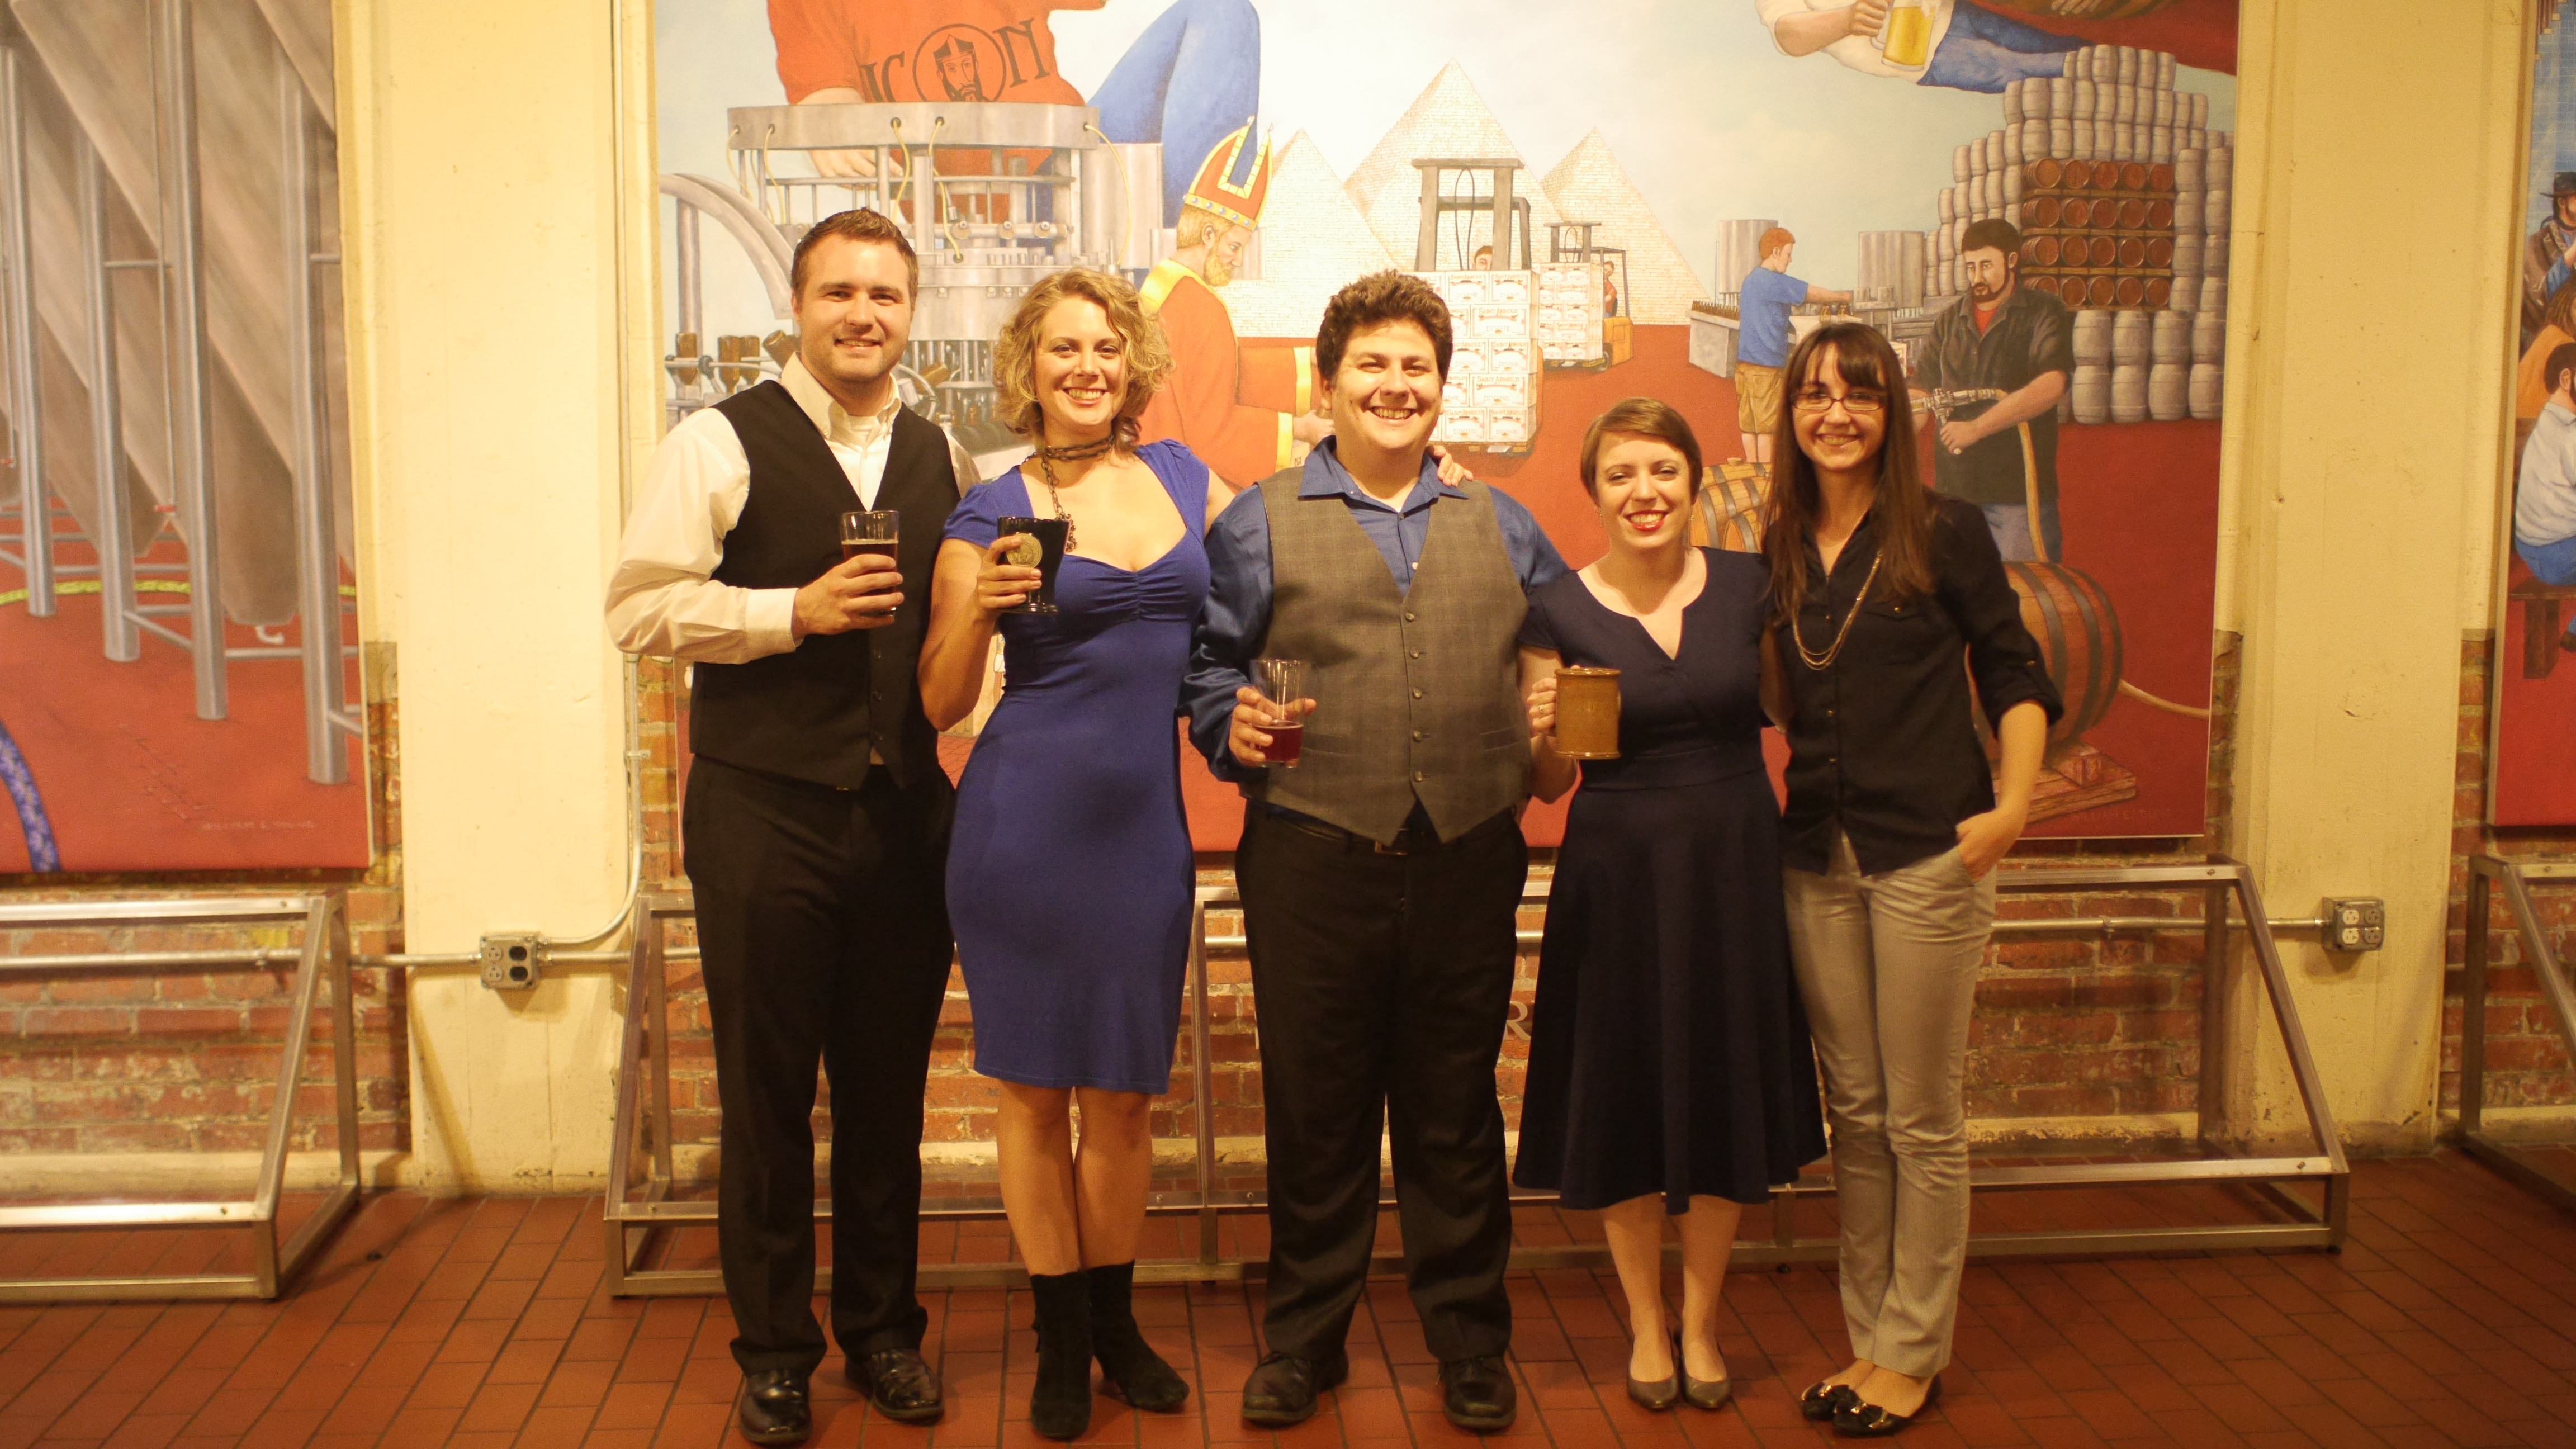 Prima Volta - Performers, performing a special concert at St. Arnold Brewery called Brindisi! Brindisi is the Italian word for 